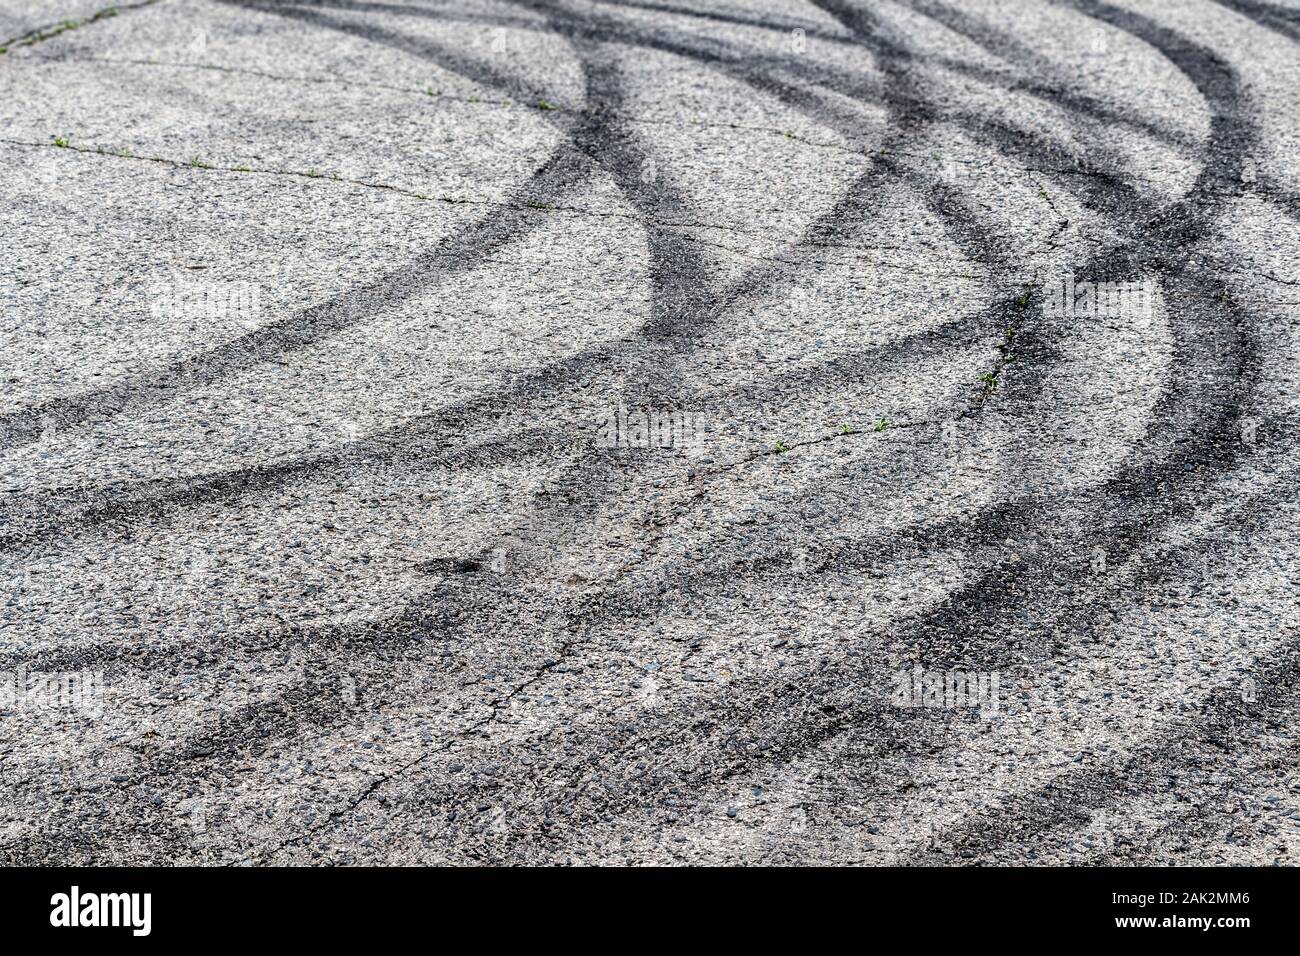 Black tracks on the pavement from a drift car. Stock Photo